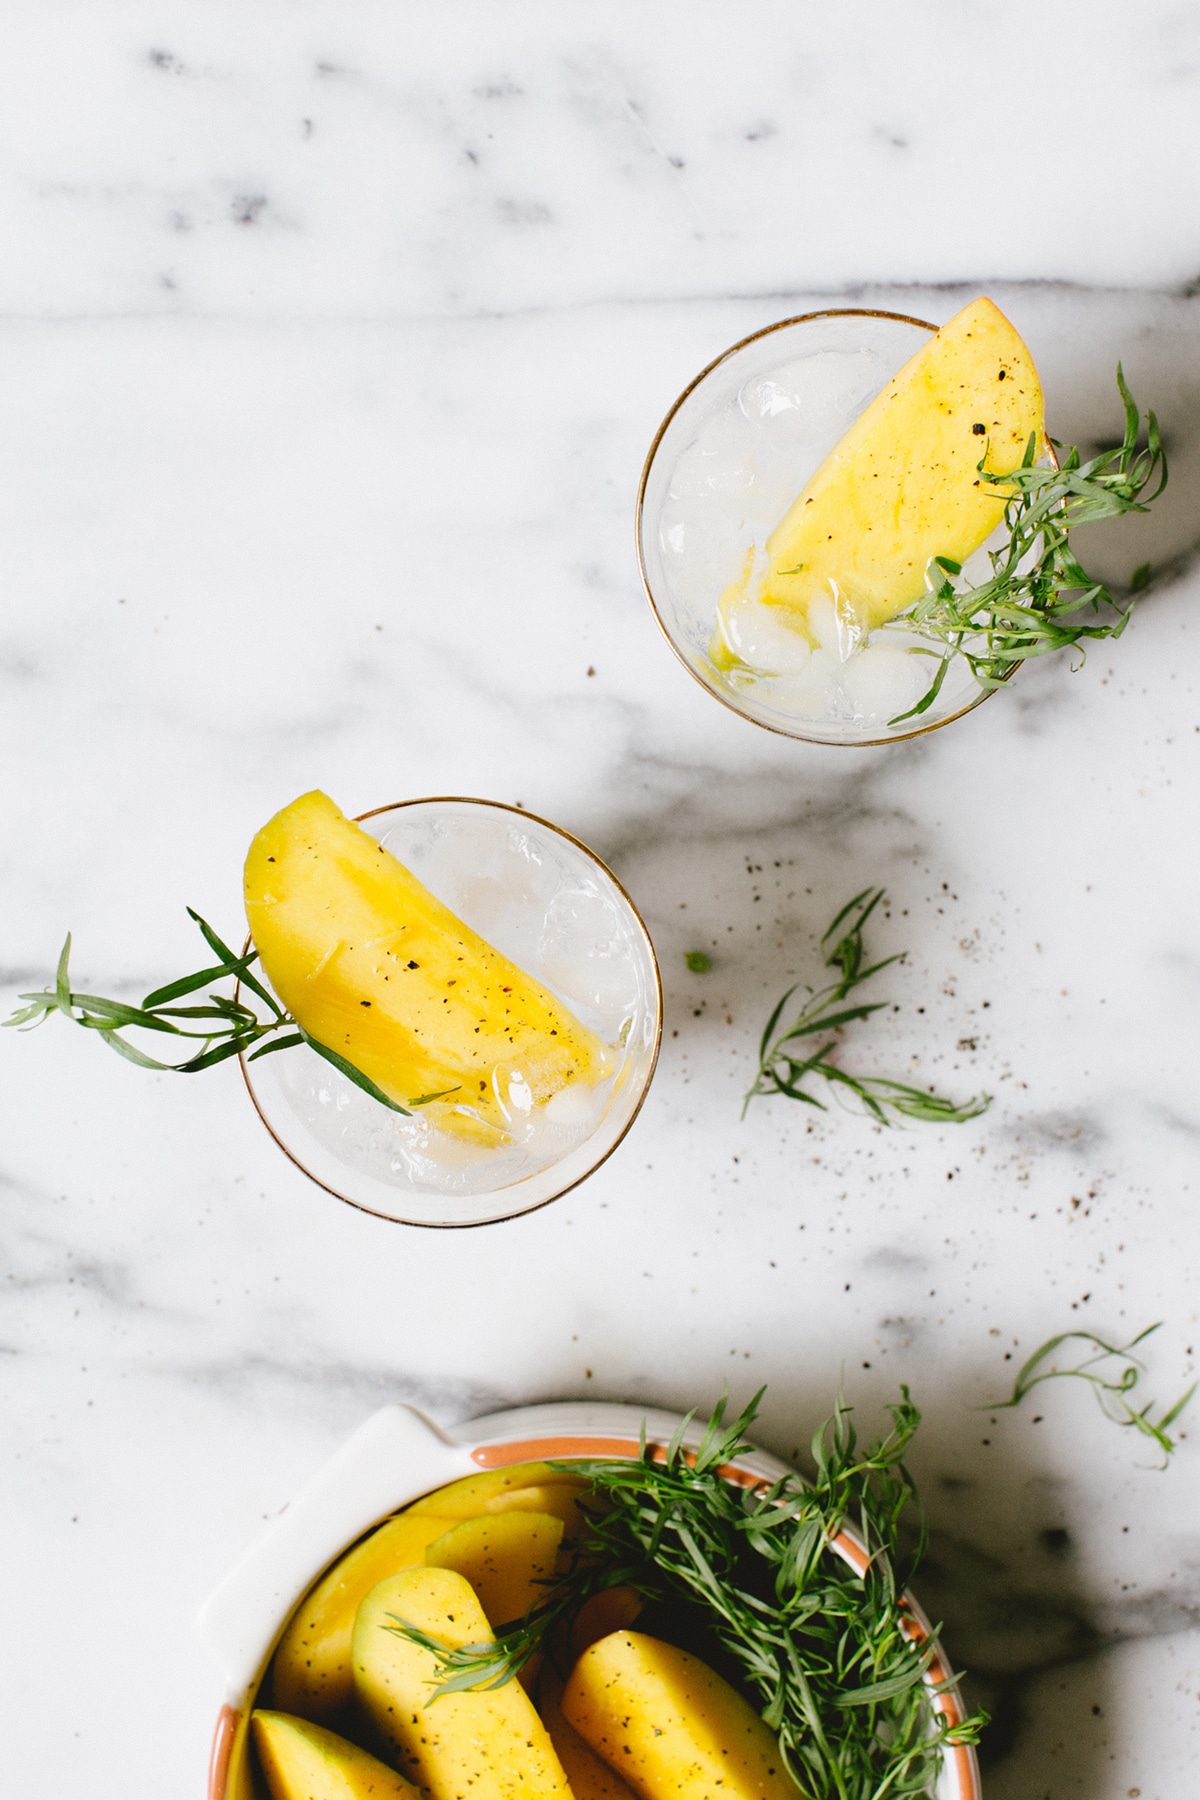 we've been doing this classic cocktail all wrong. find out why a mango gin & tonic (with pepper!) is the way to go! | recipe on coco kelley